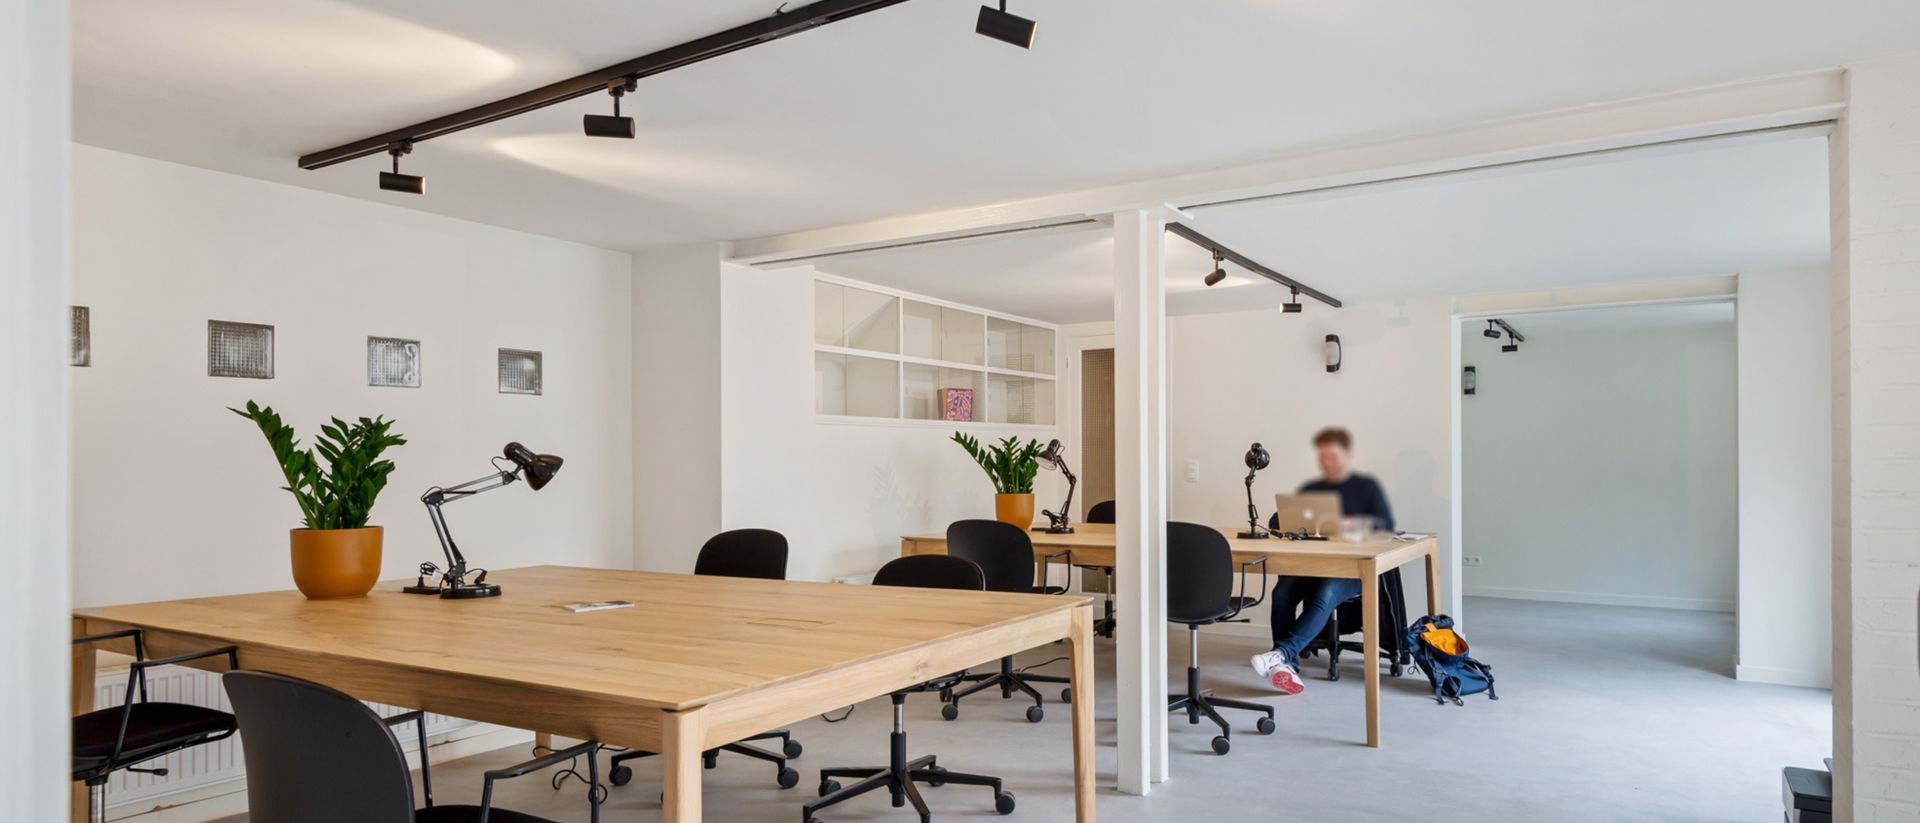 Ramón Coworking space designed with Live Light office rental furniture 